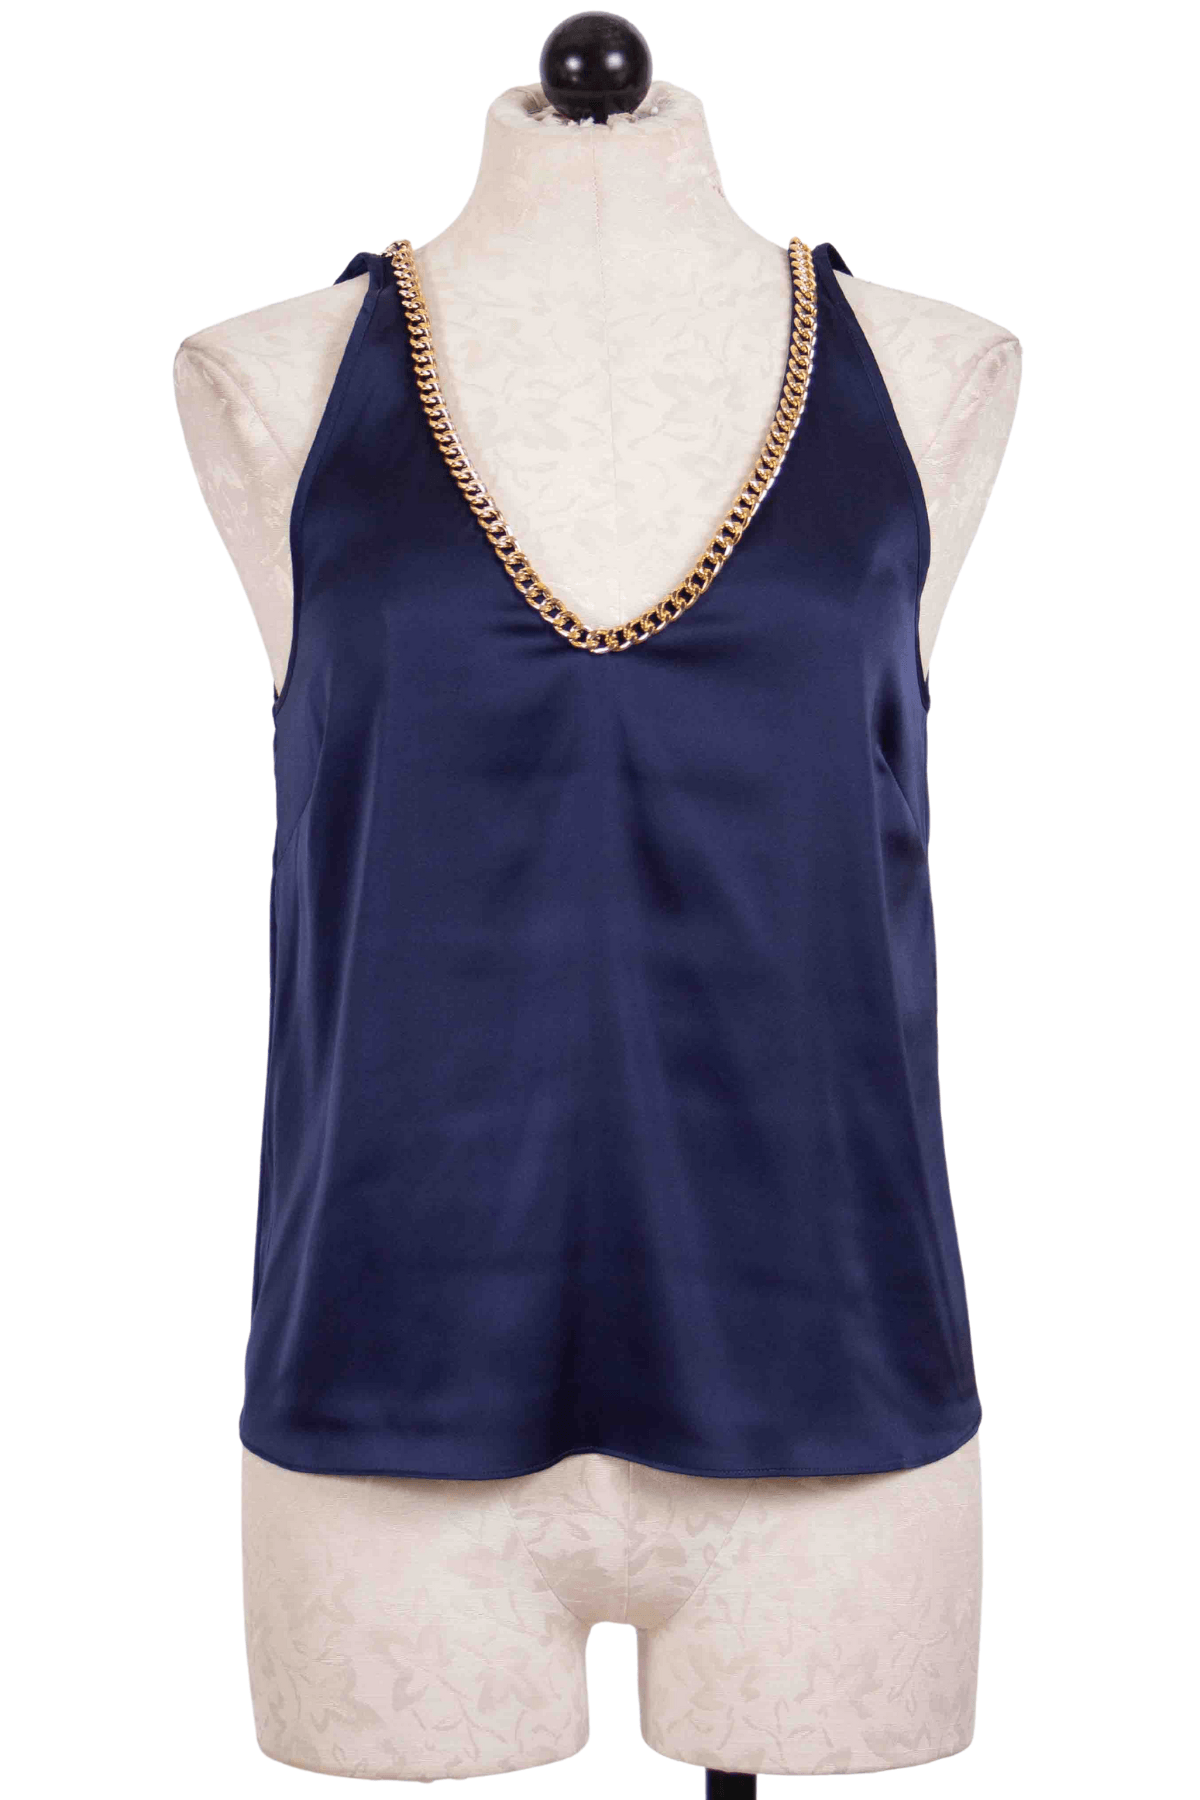 Navy Dallas Chain Tank by Generation Love